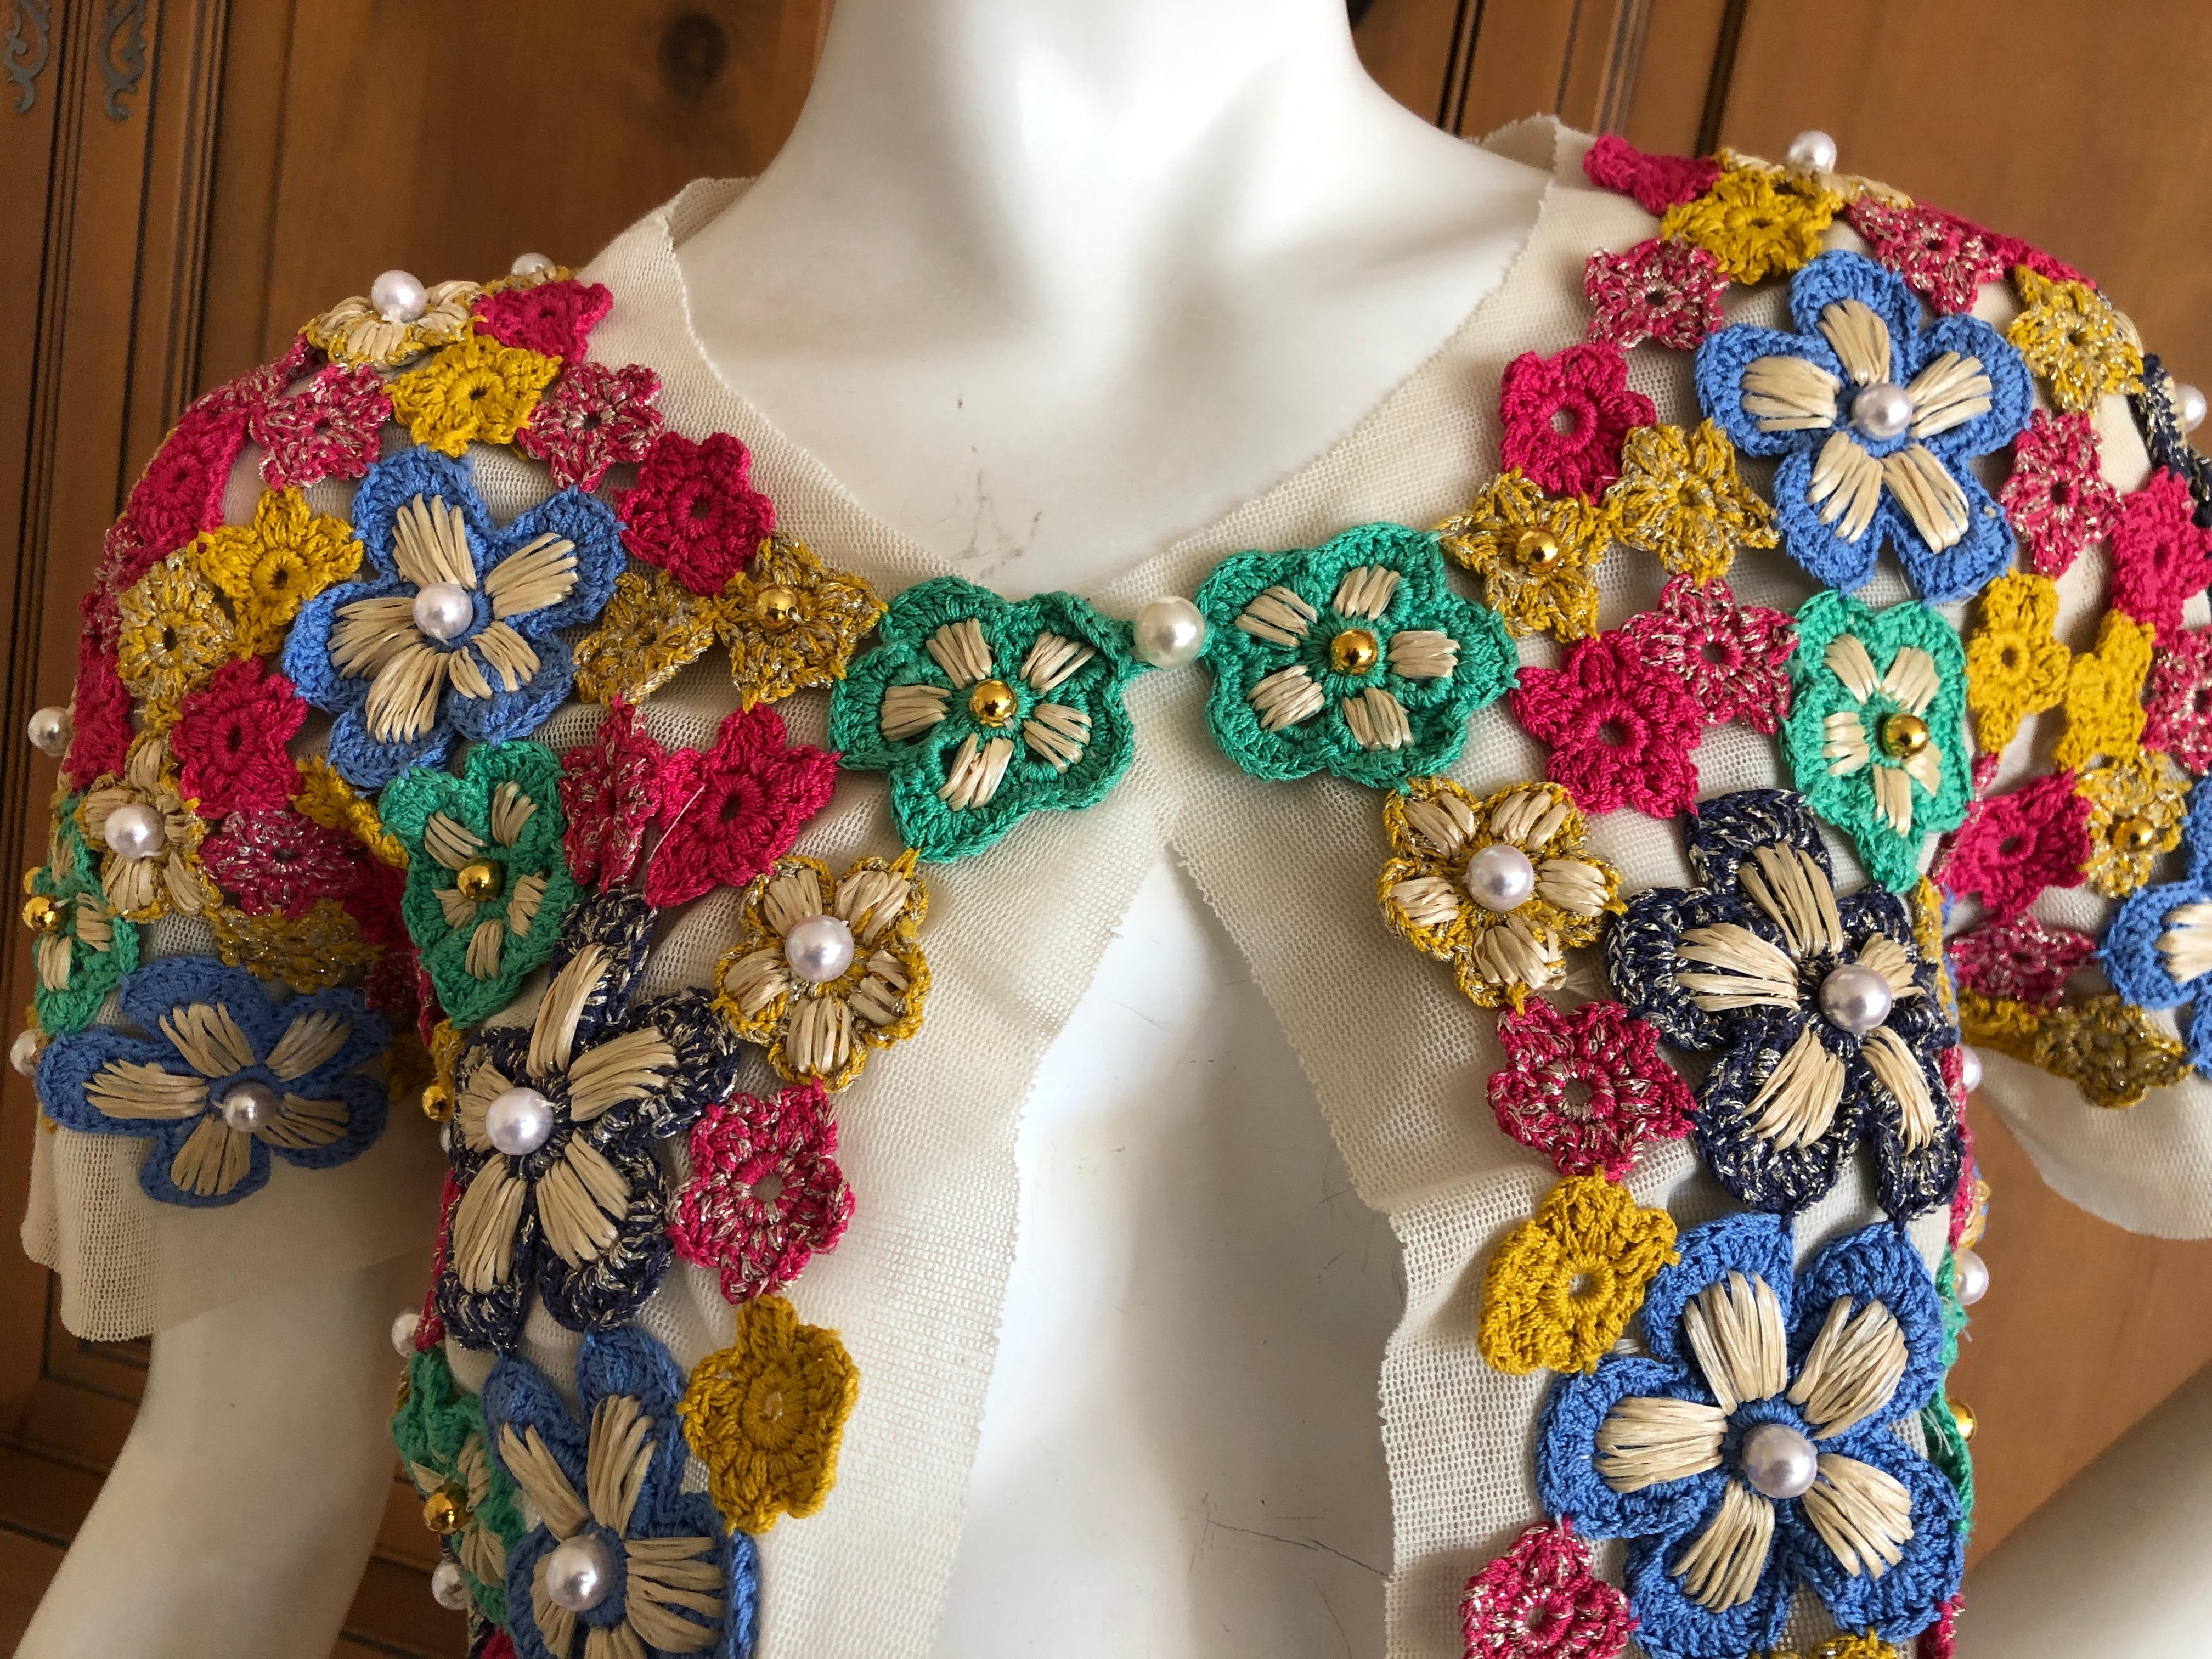 Moschino Hippy Chick Crochet Embellished Shrug for Cheap & Chic For Sale 1